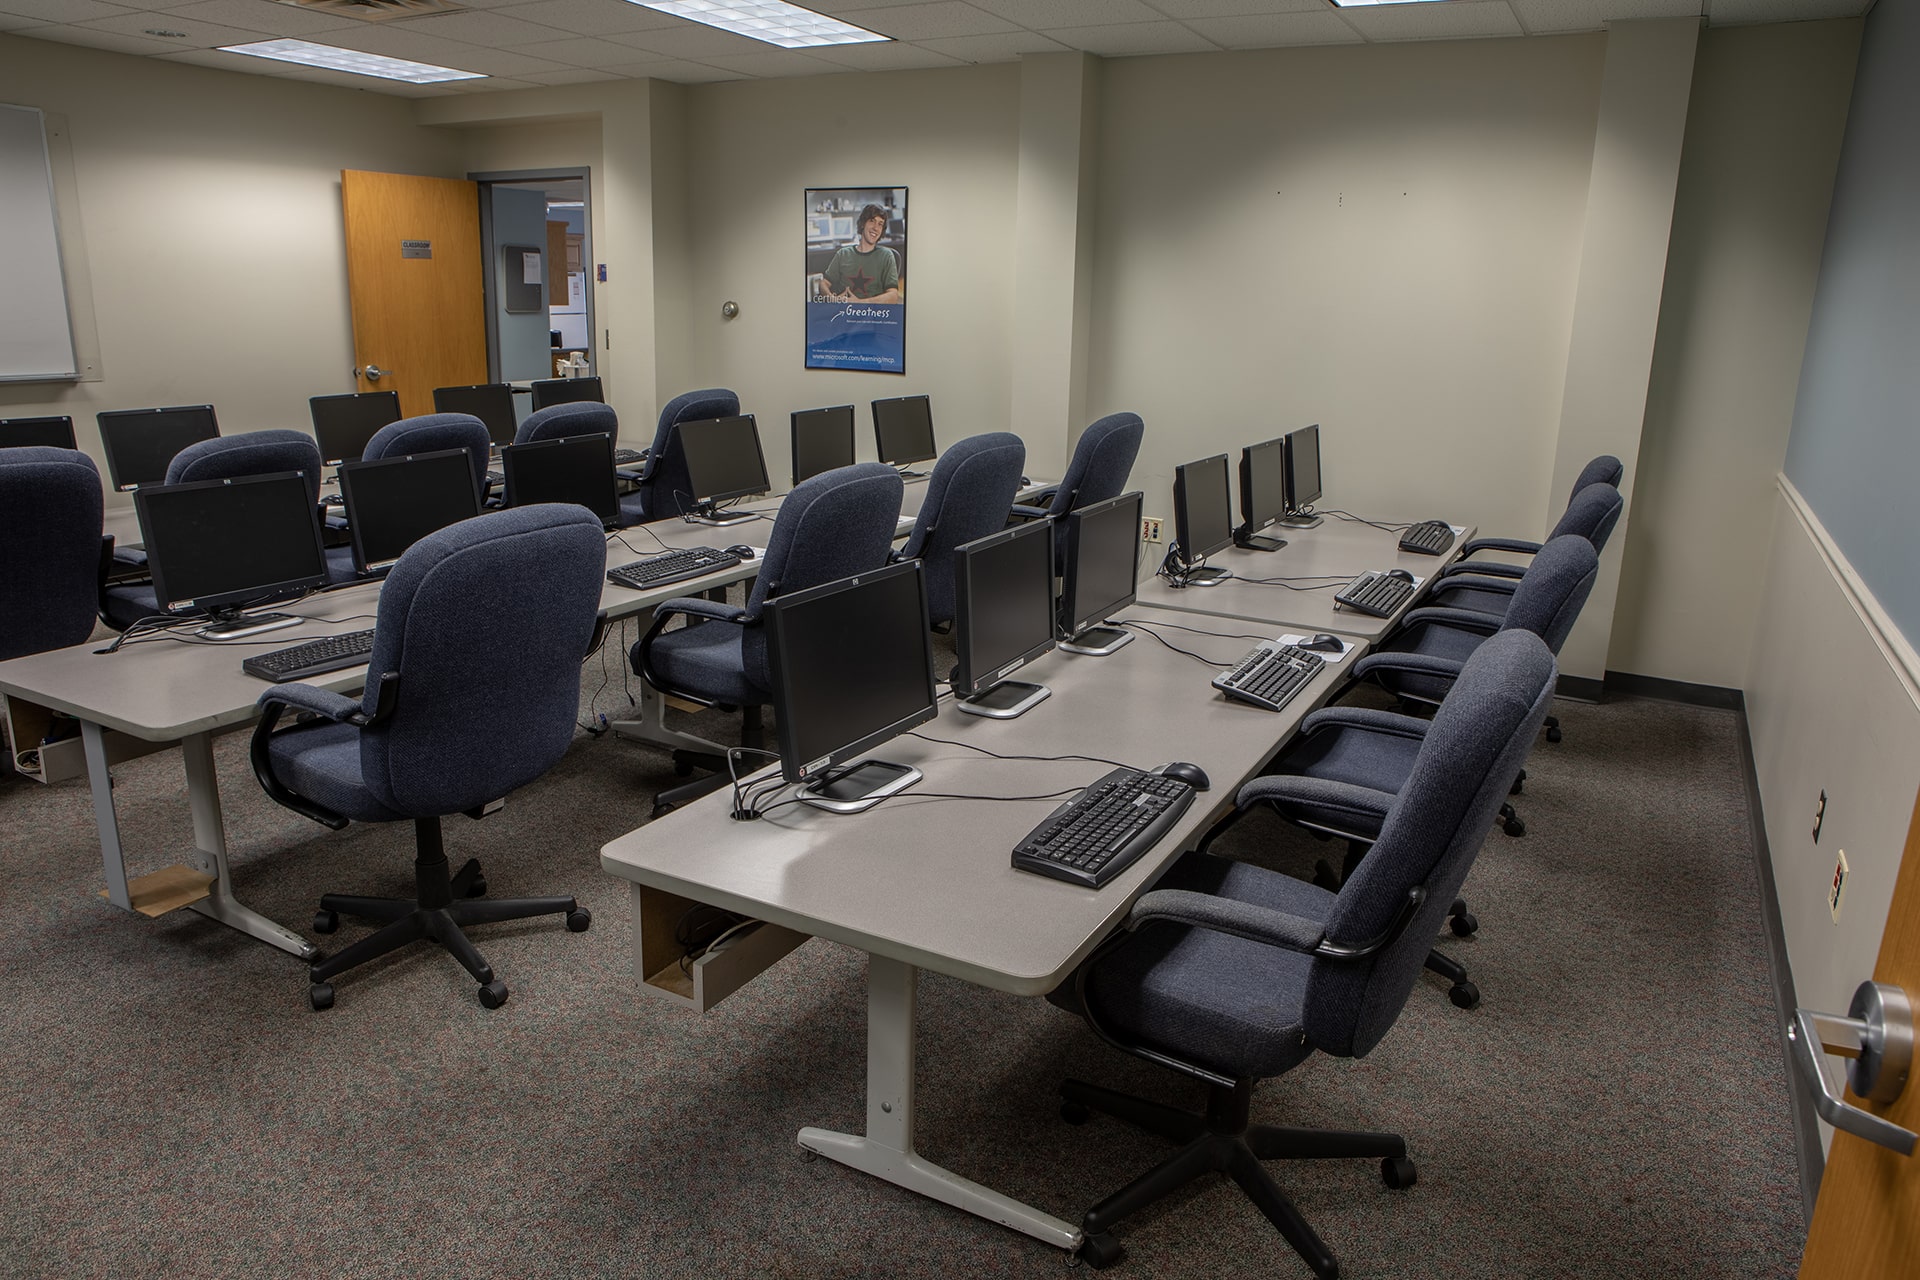 Classroom and Conference Room Rentals at CTComp in Rocky Hill and Plantsville, CT